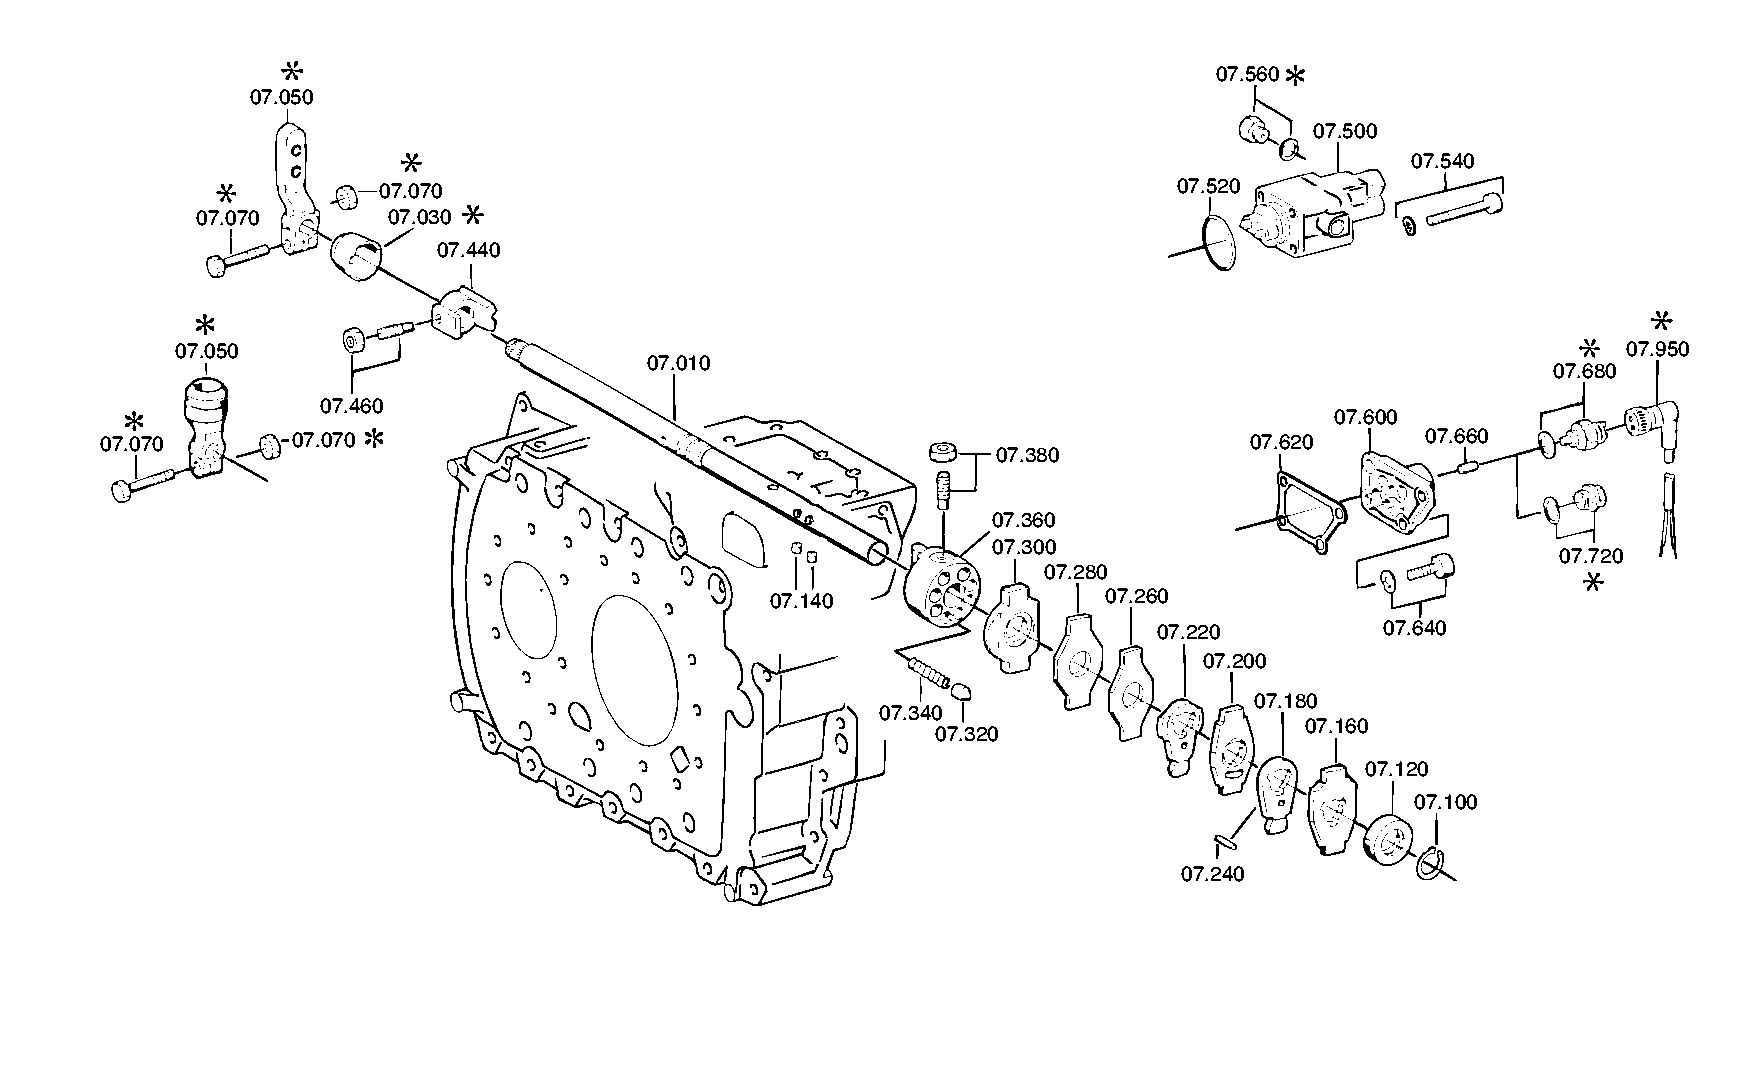 drawing for DAF 692183 - CUT-OFF VALVE (figure 2)